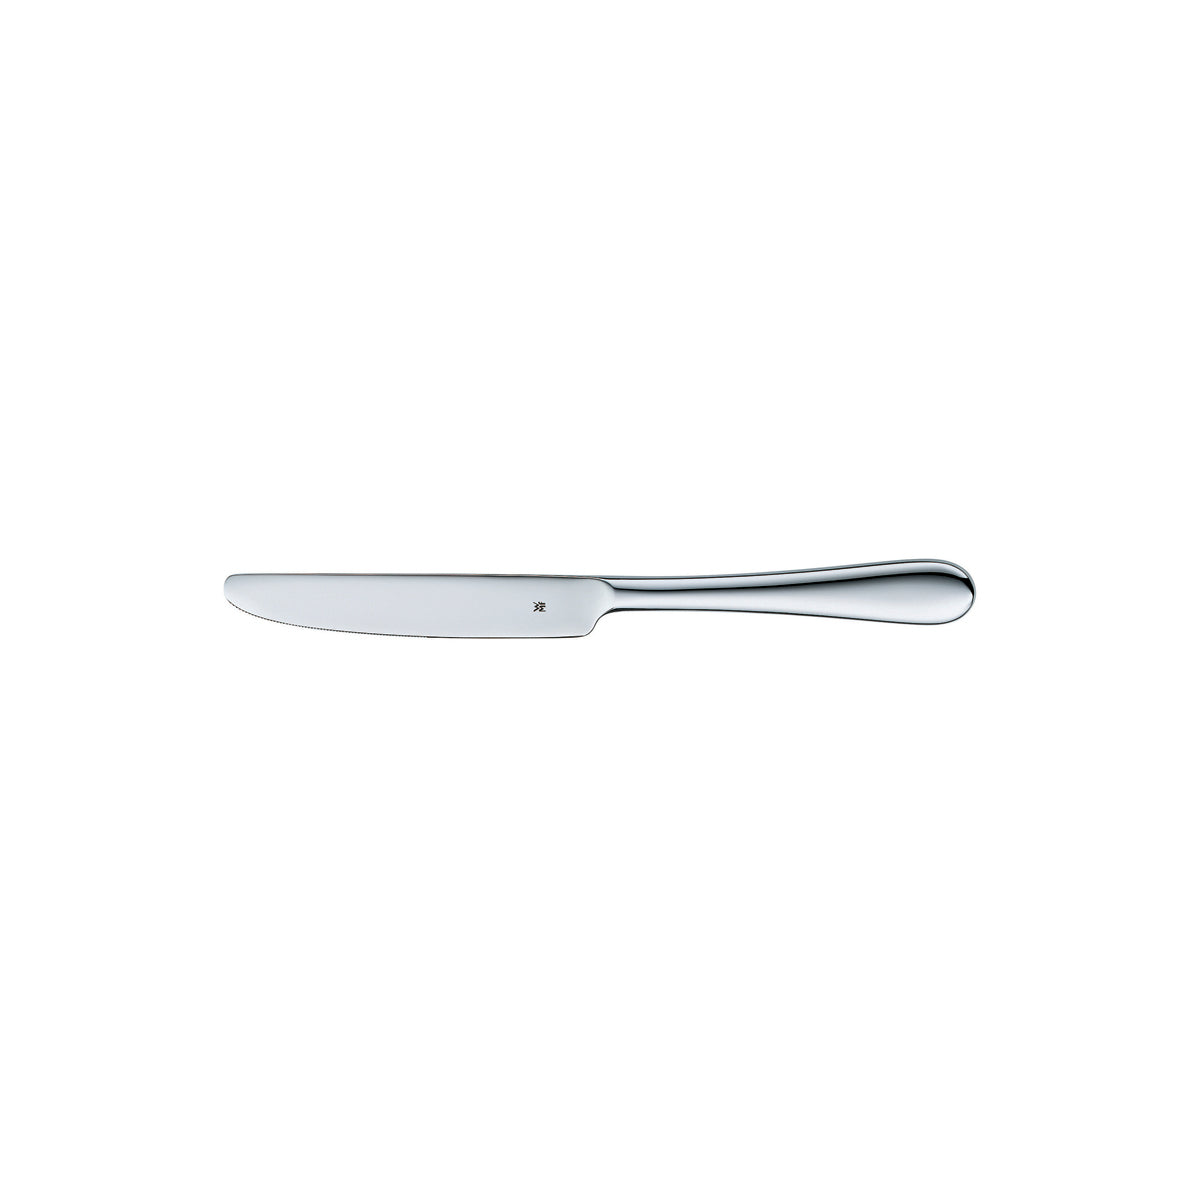 12.1903.6049 WMF Signum Table Knife Stainless Steel Tomkin Australia Hospitality Supplies